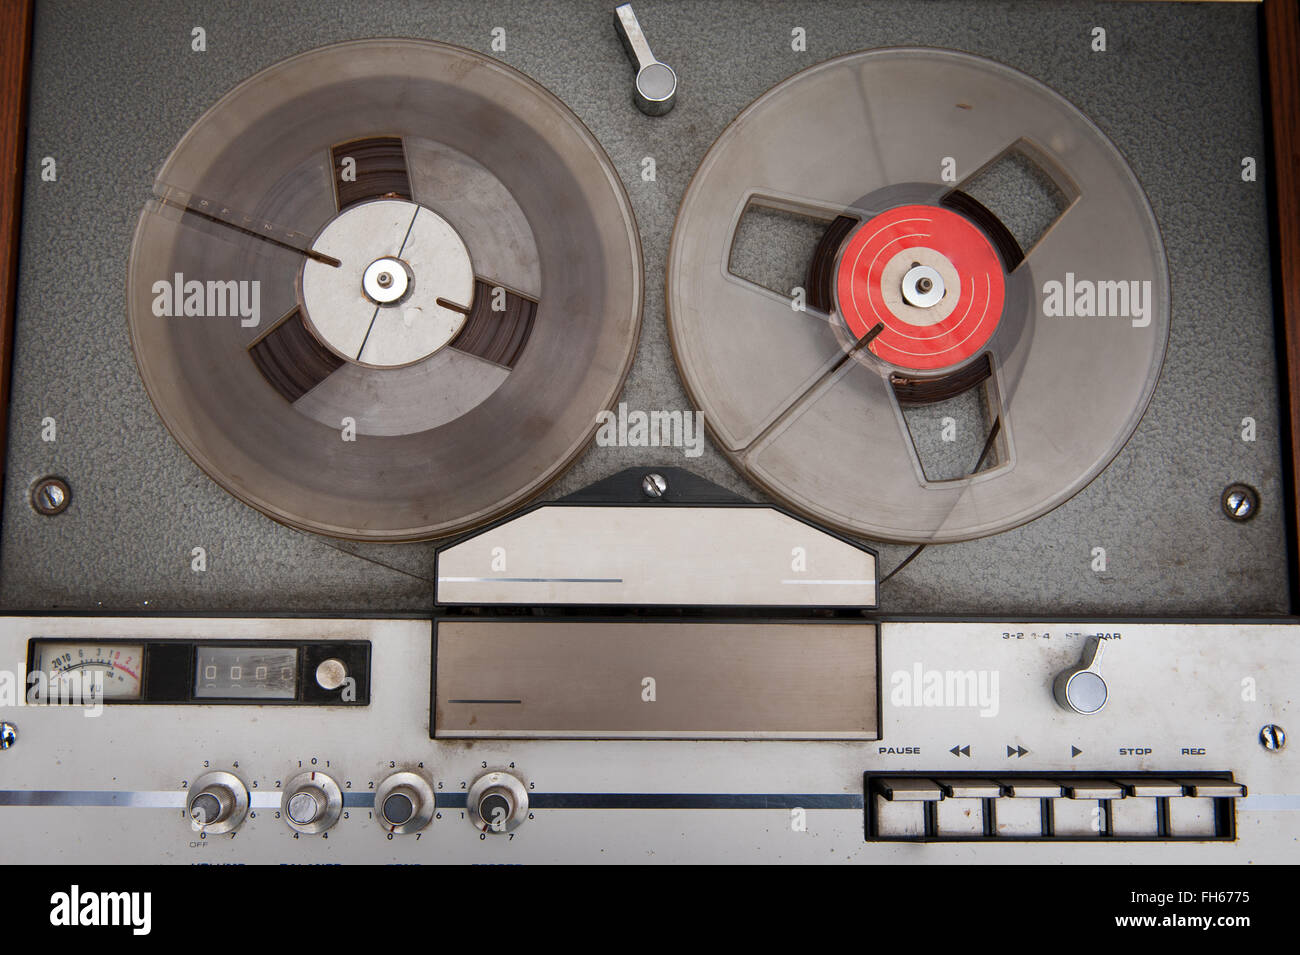 Old portable reel to reel audio tape recorder music device Stock Photo -  Alamy